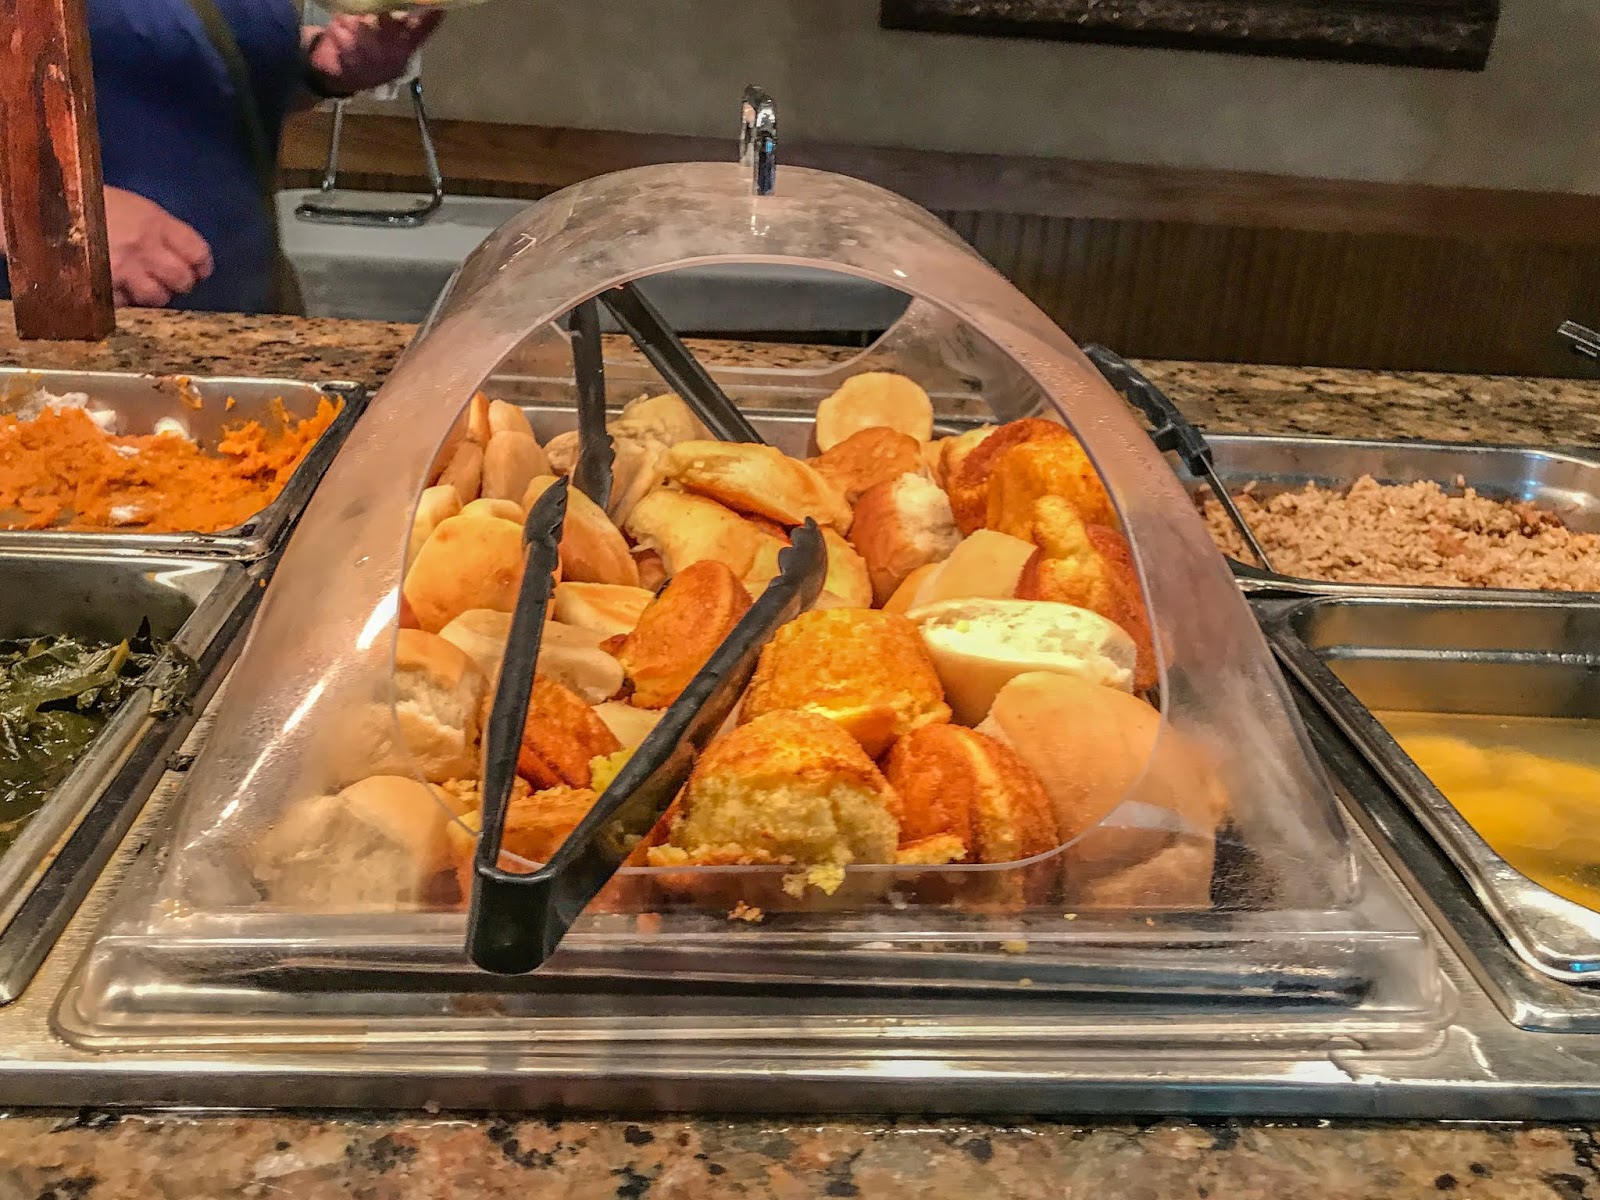 If you like Southern Style Comfort Foods You'll love this Buffet in